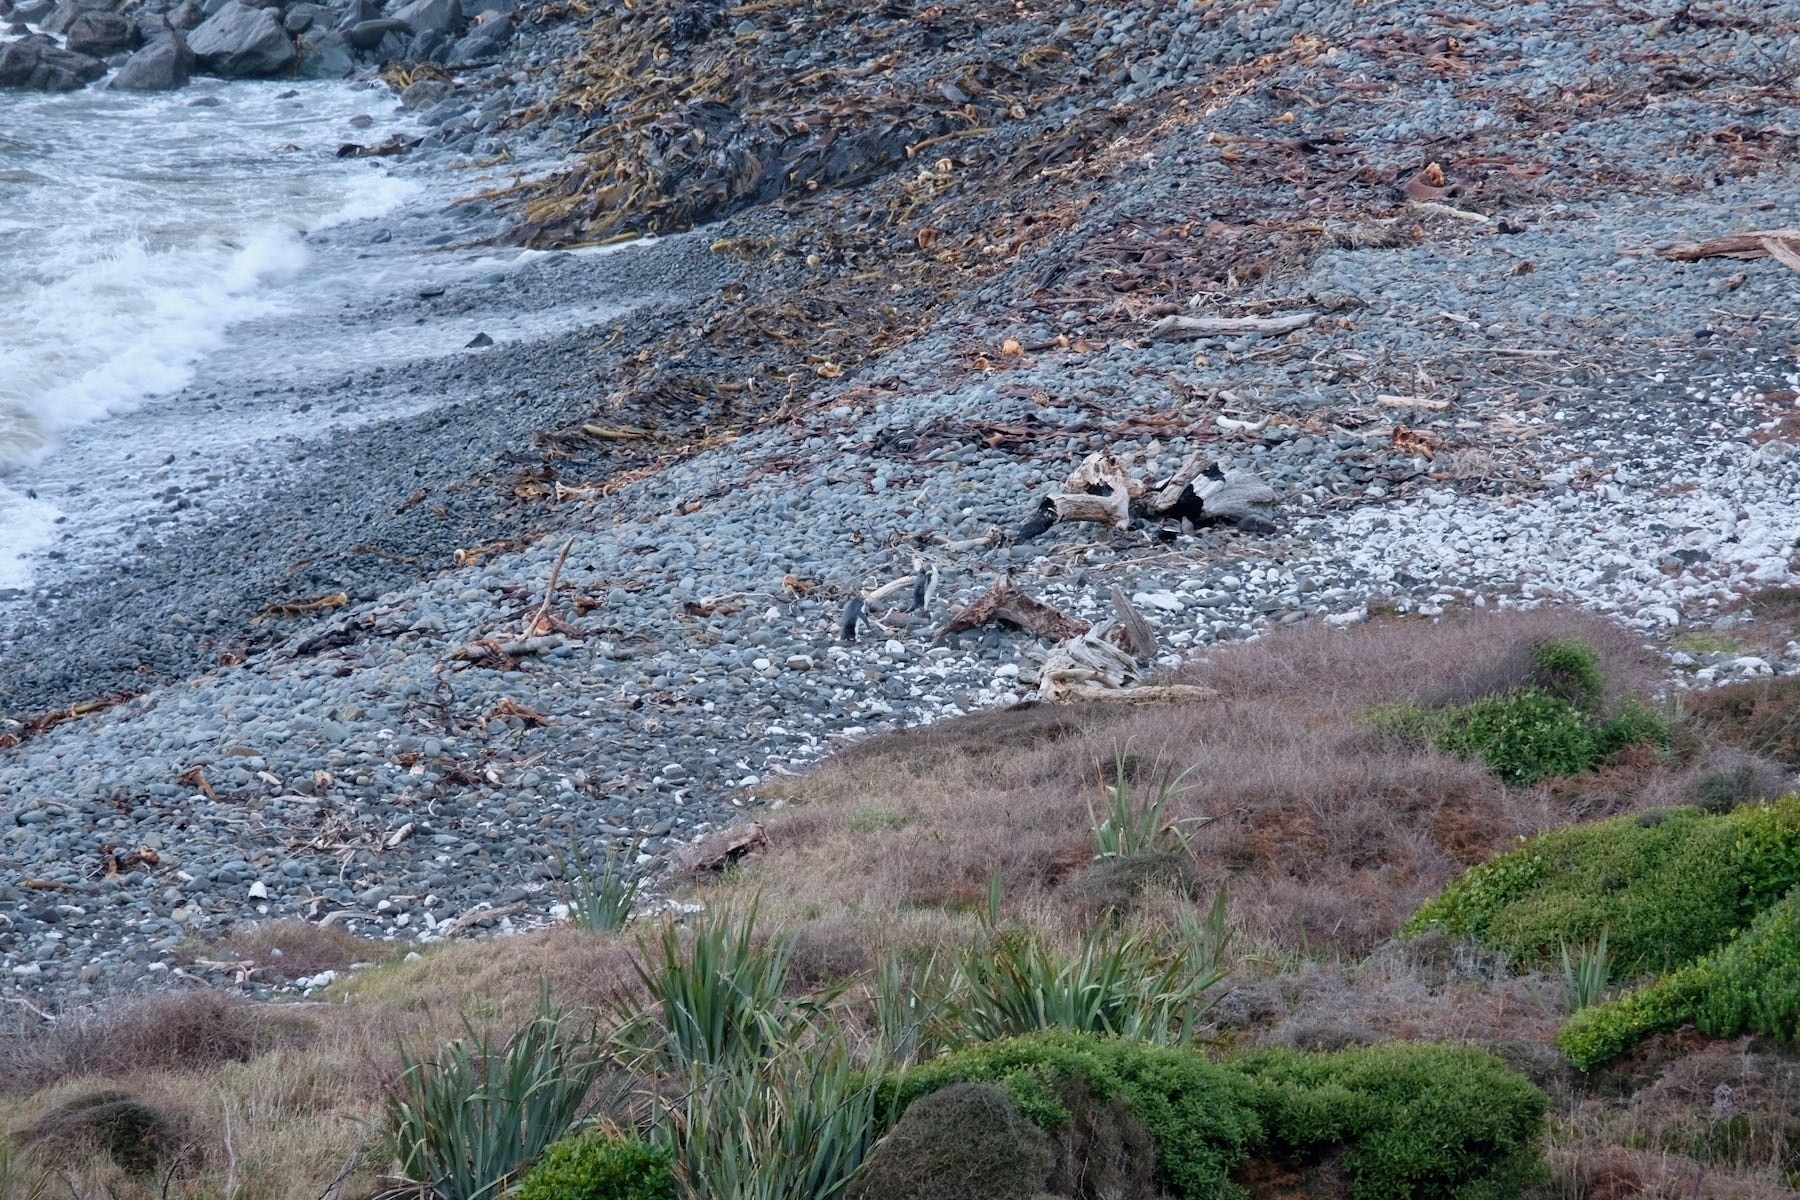 A distant pair of penguins on a shingle beach. 